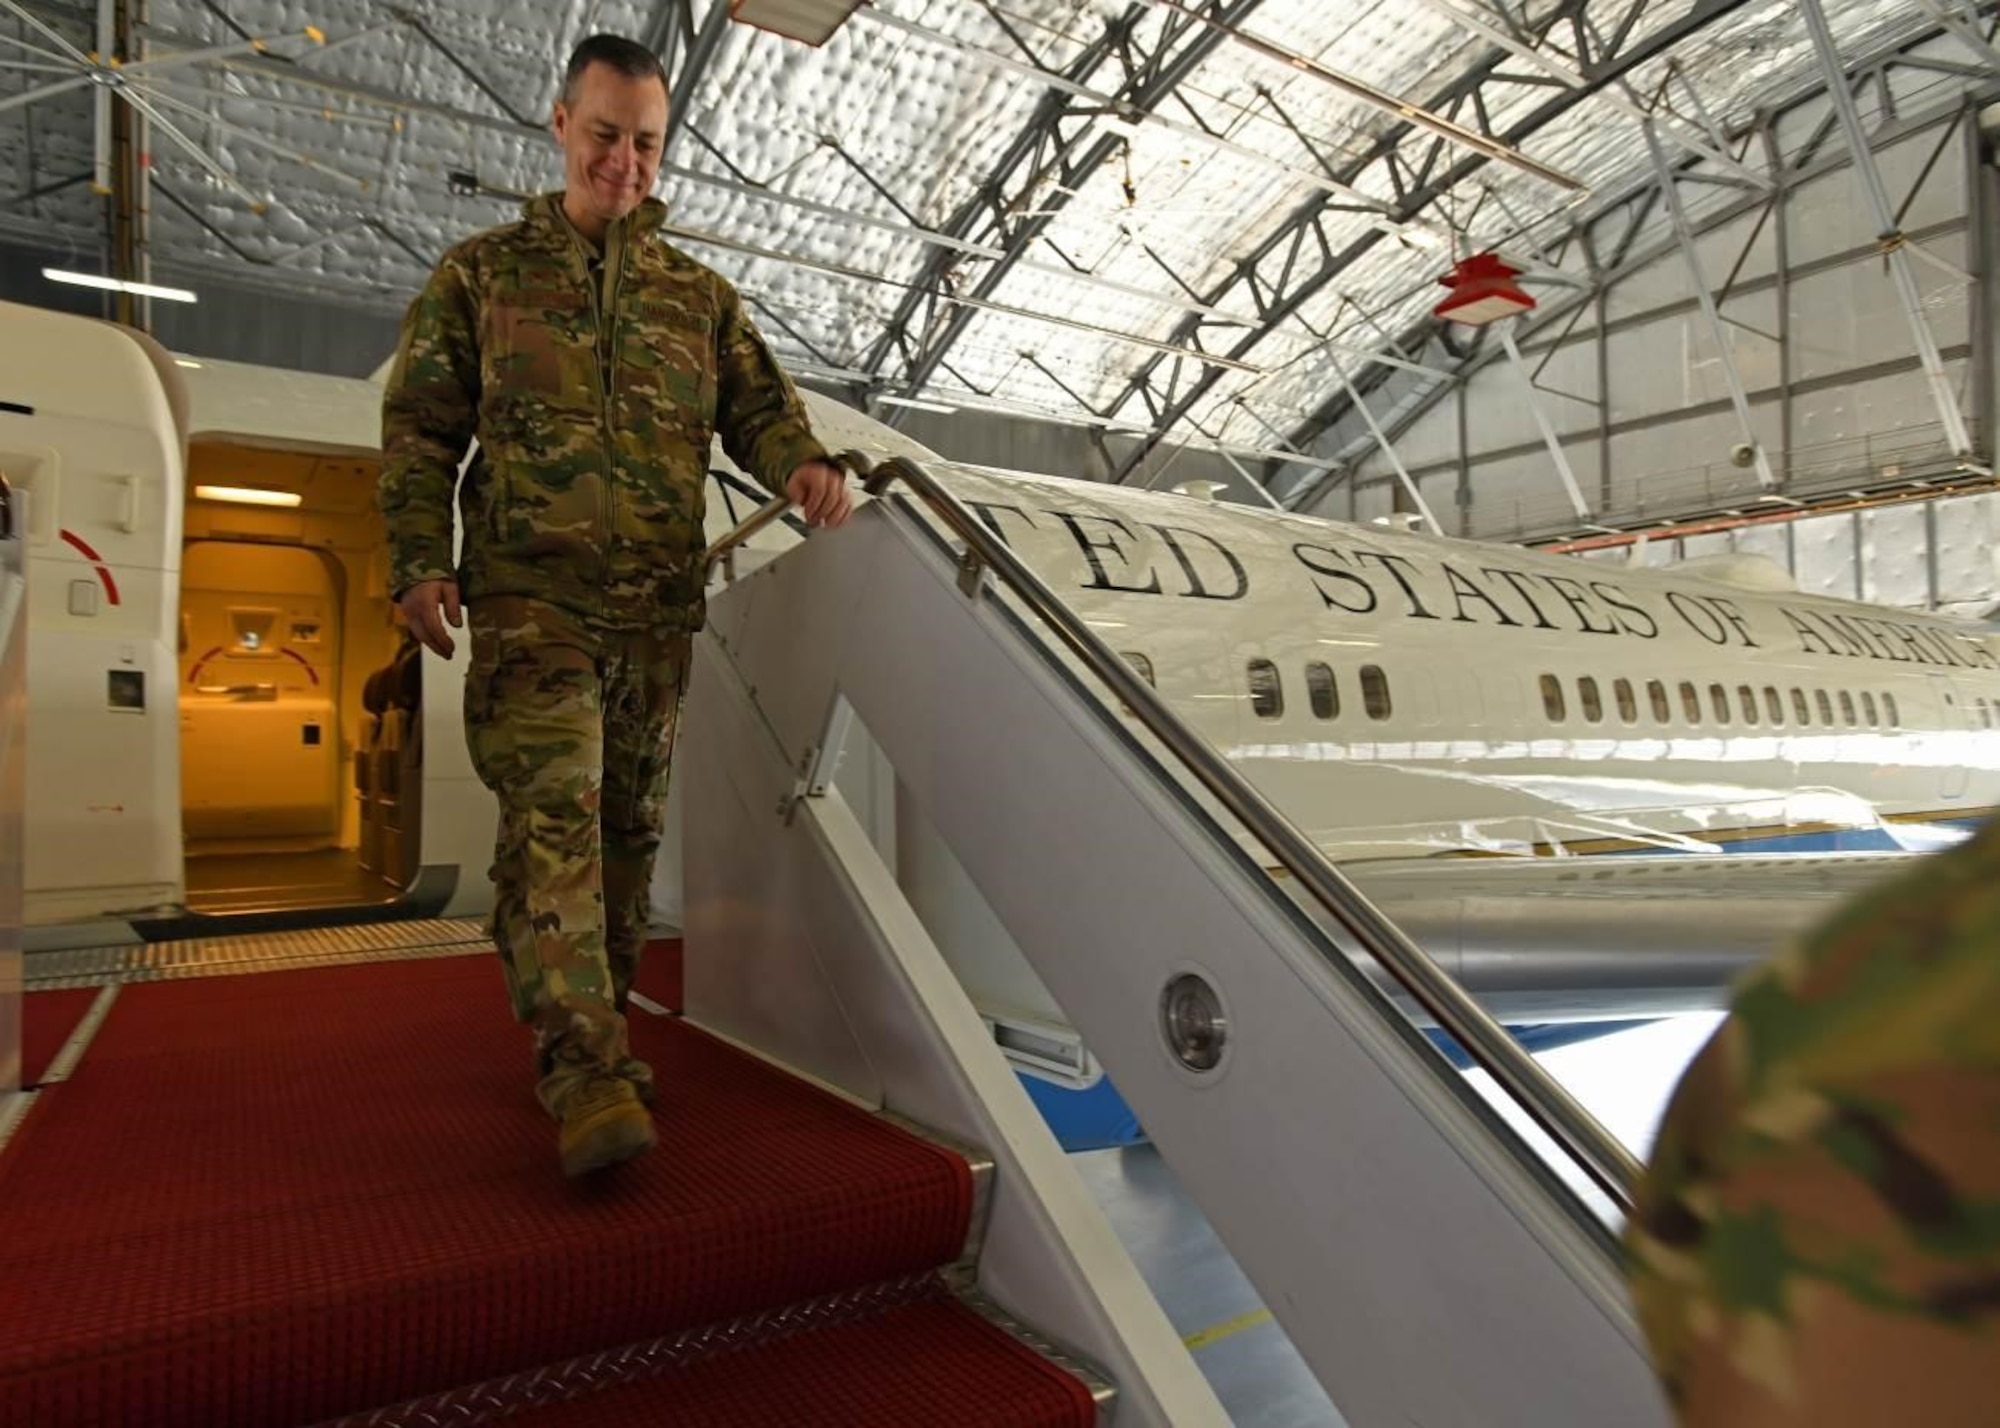 Col. Robby Hanovich, Air Force District of Washington and 320th Air Expeditionary Wing deputy commander, departs a C-32A aircraft during an 89th Airlift Wing Immersion Tour on Joint Base Andrews, Maryland, Feb. 28, 2020. The C-32A transports high-priority personnel and has the distinctive call sign “Air Force Two” when moving the vice president. It also transports the first lady, members of the cabinet, and Congress. (U.S. Air Force photo by Tech. Sgt. Kentavist P. Brackin)